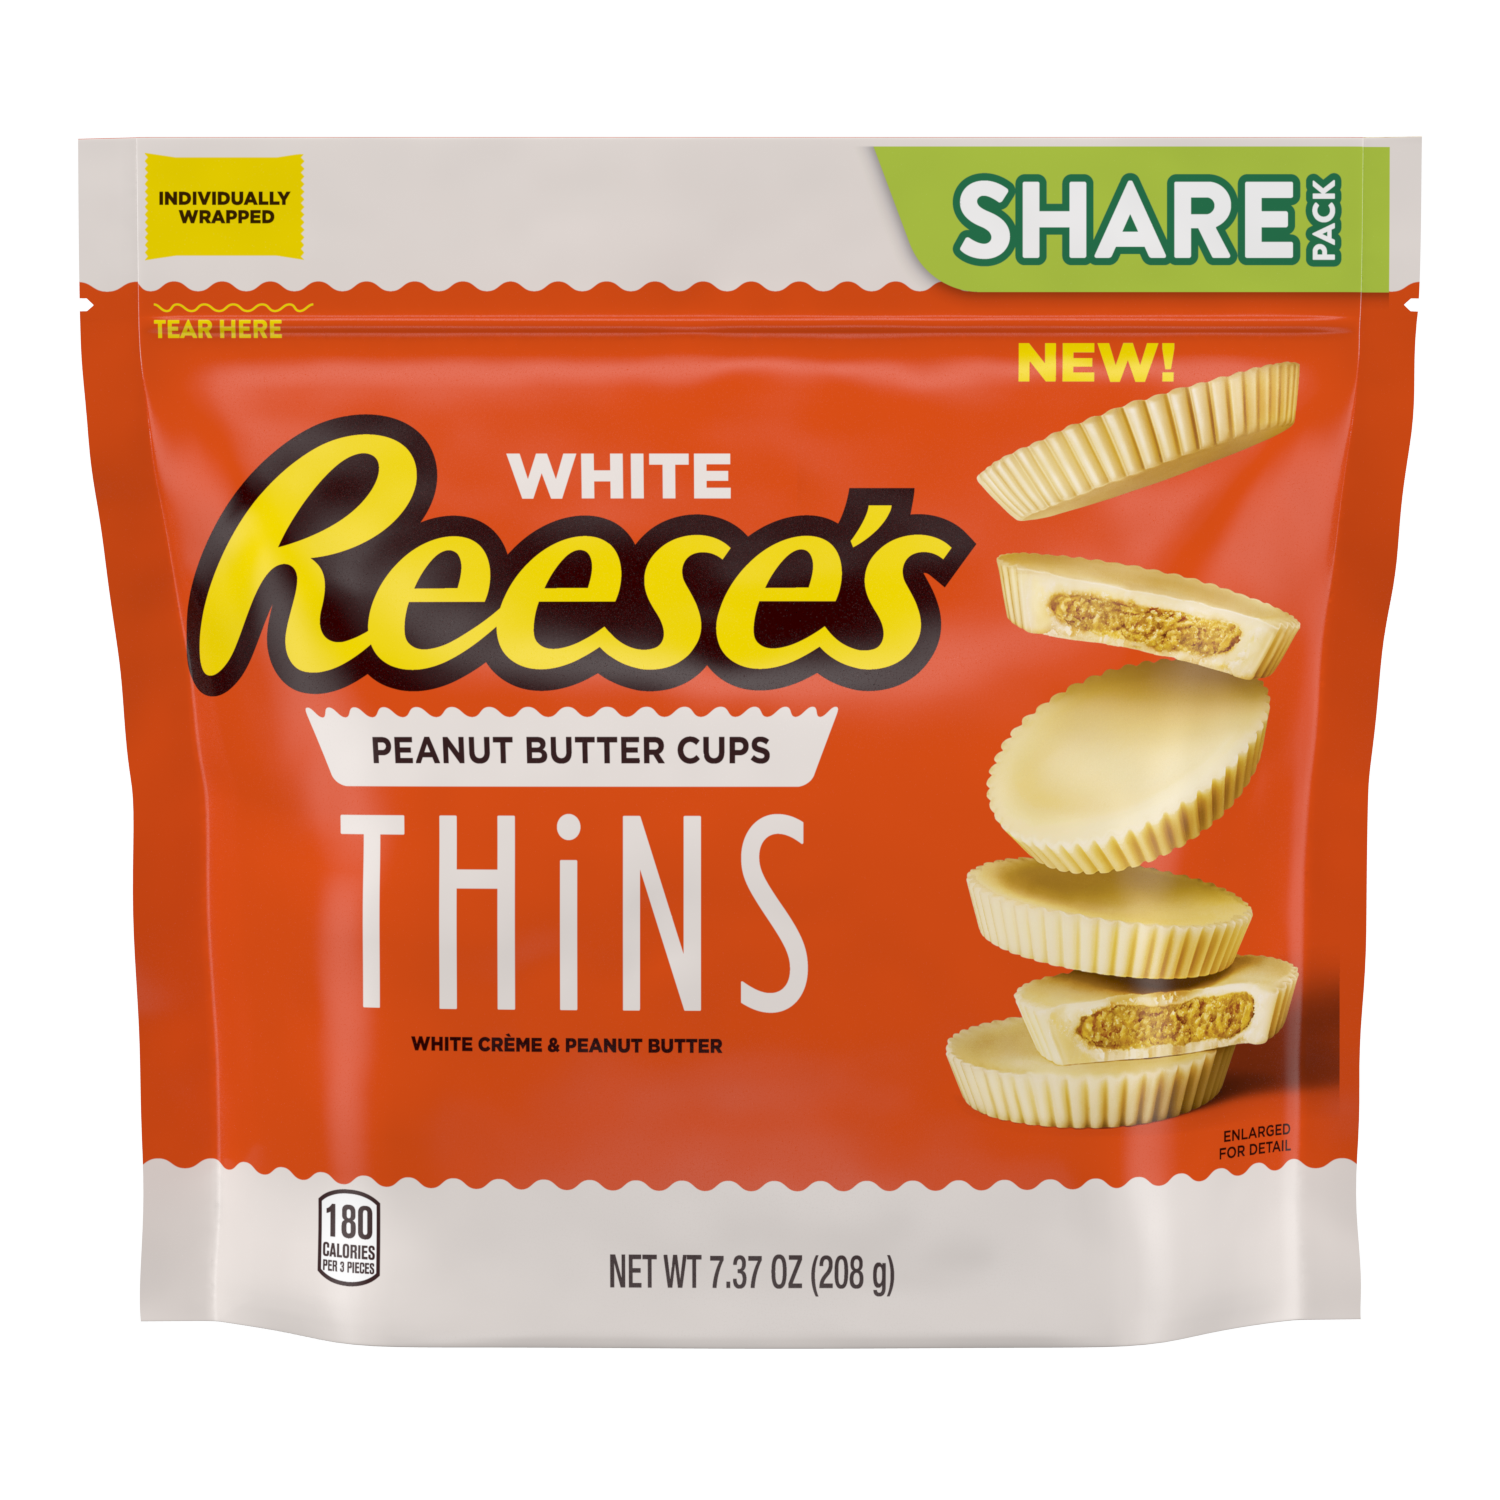 Share Pack    Reese's Peanut Butter Cups Thins White